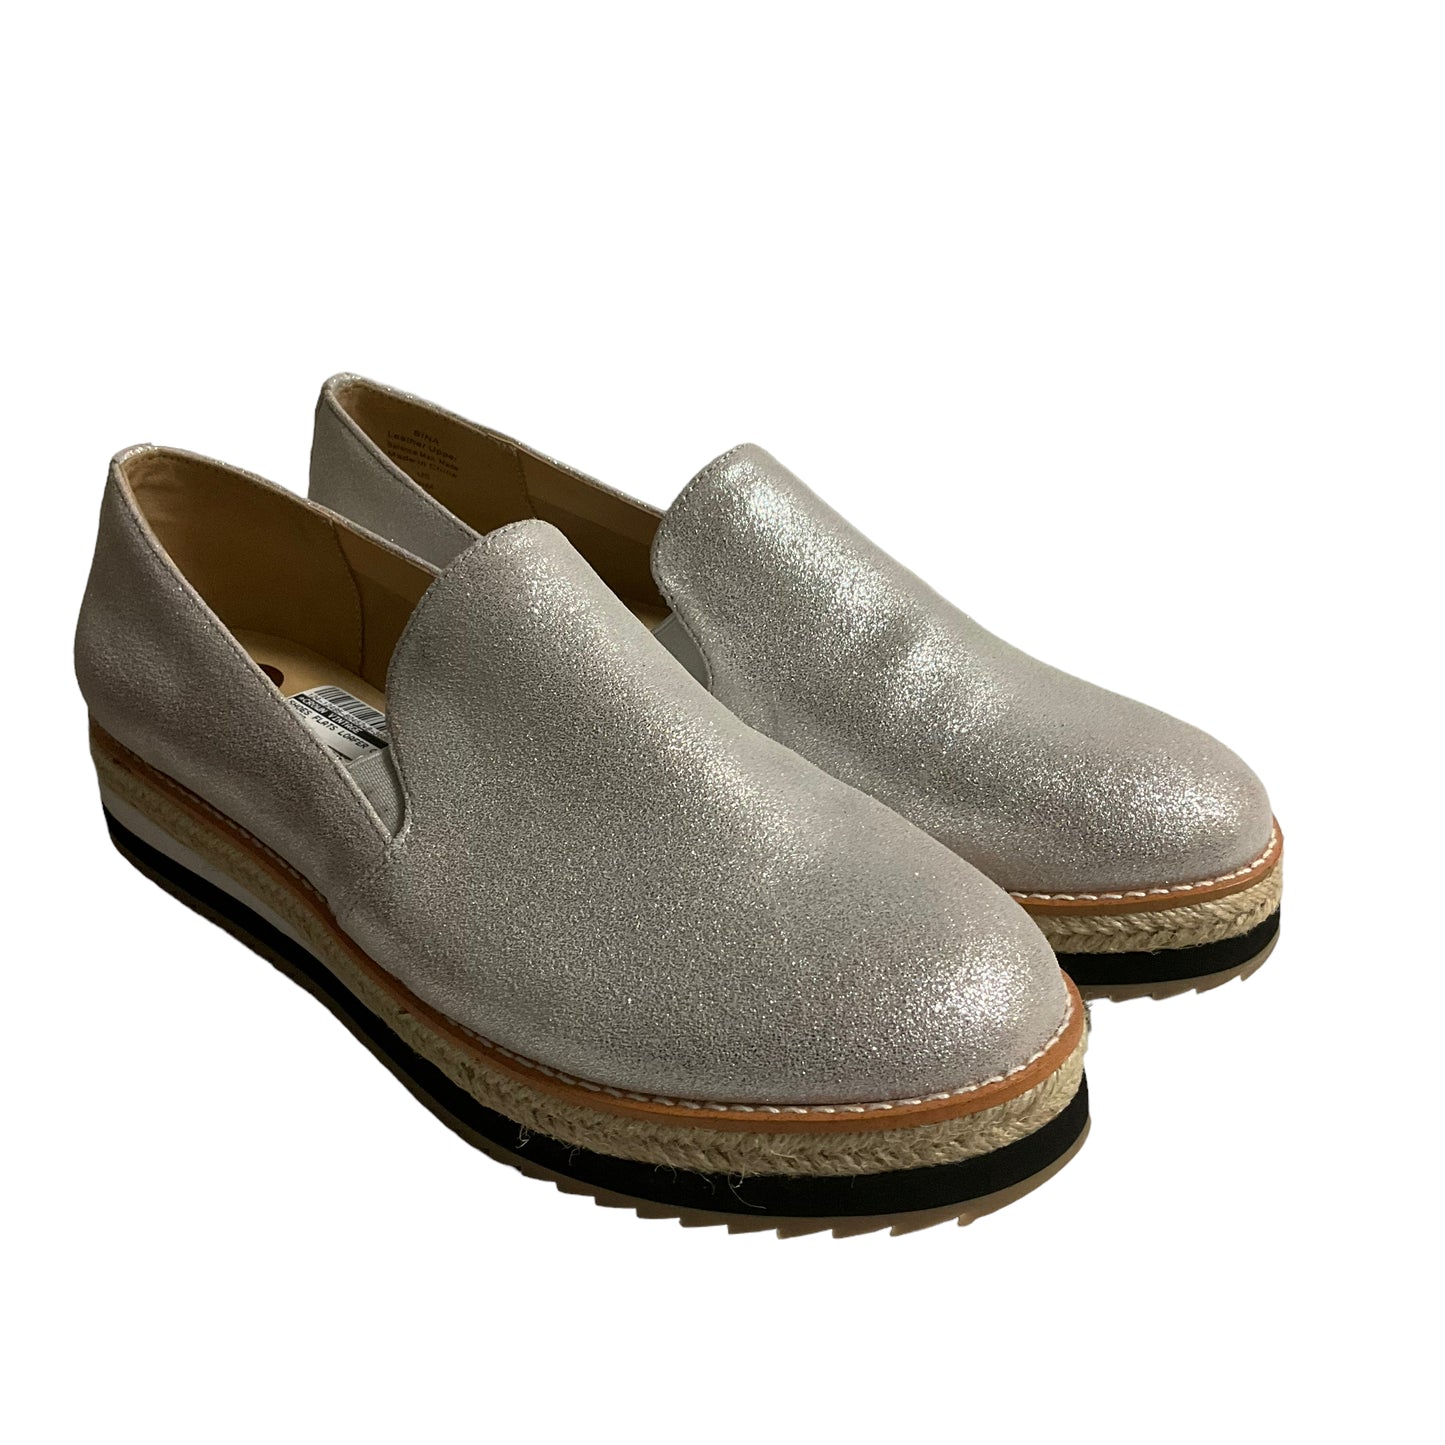 Shoes Flats Loafer Oxford By Crown Vintage  Size: 10